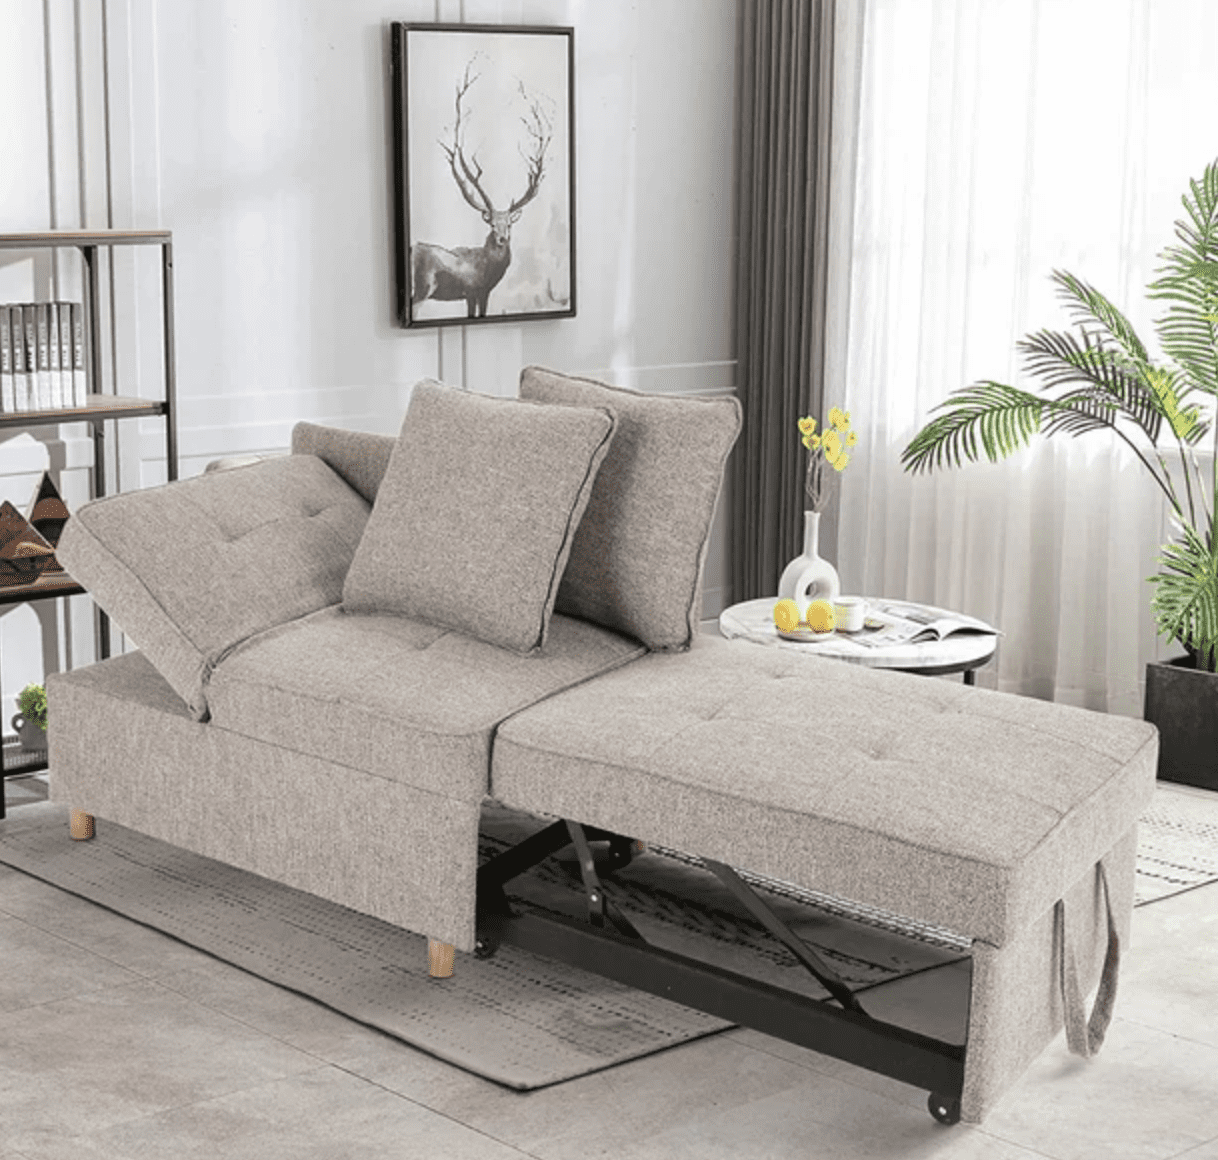 Walmart 4 In 1 Convertible Sofa: It's Perfect For Small Spaces | Apartment  Therapy Regarding 4 In 1 Convertible Sleeper Chair Beds (Photo 6 of 15)